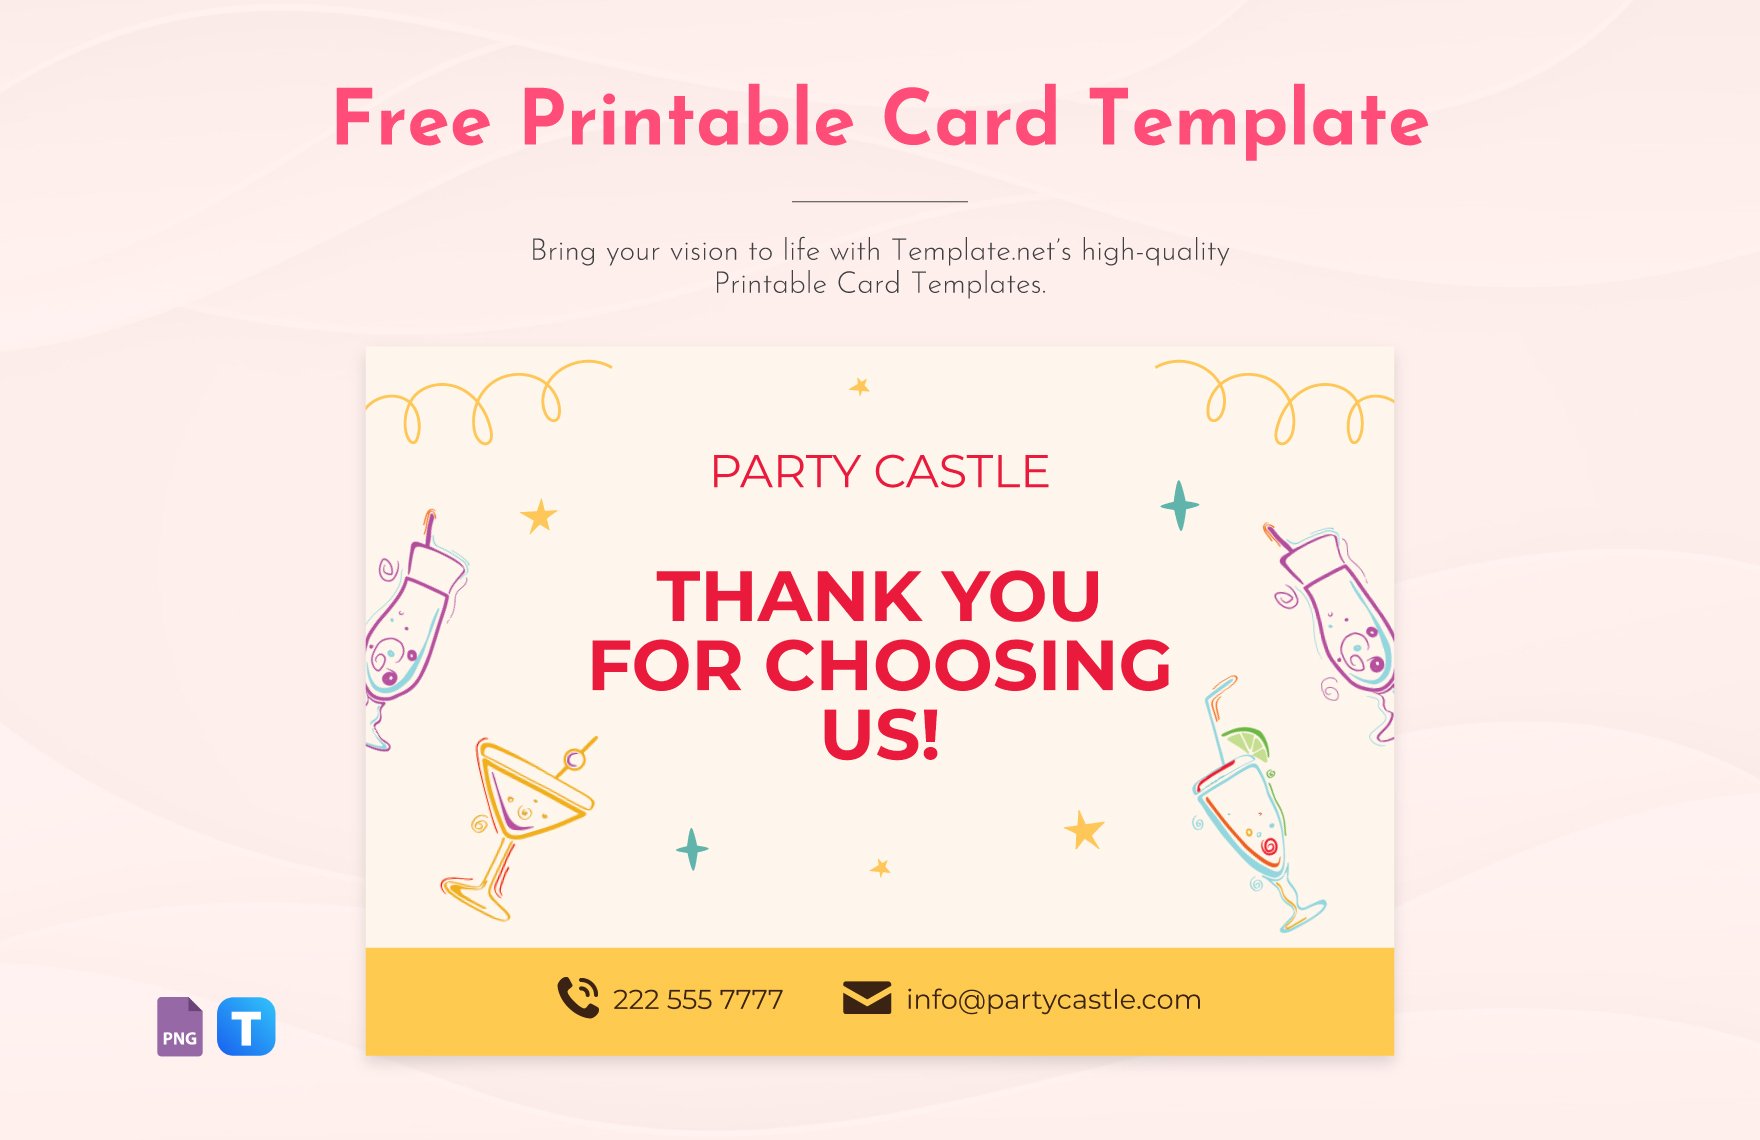 Free Printable Card Template in PNG